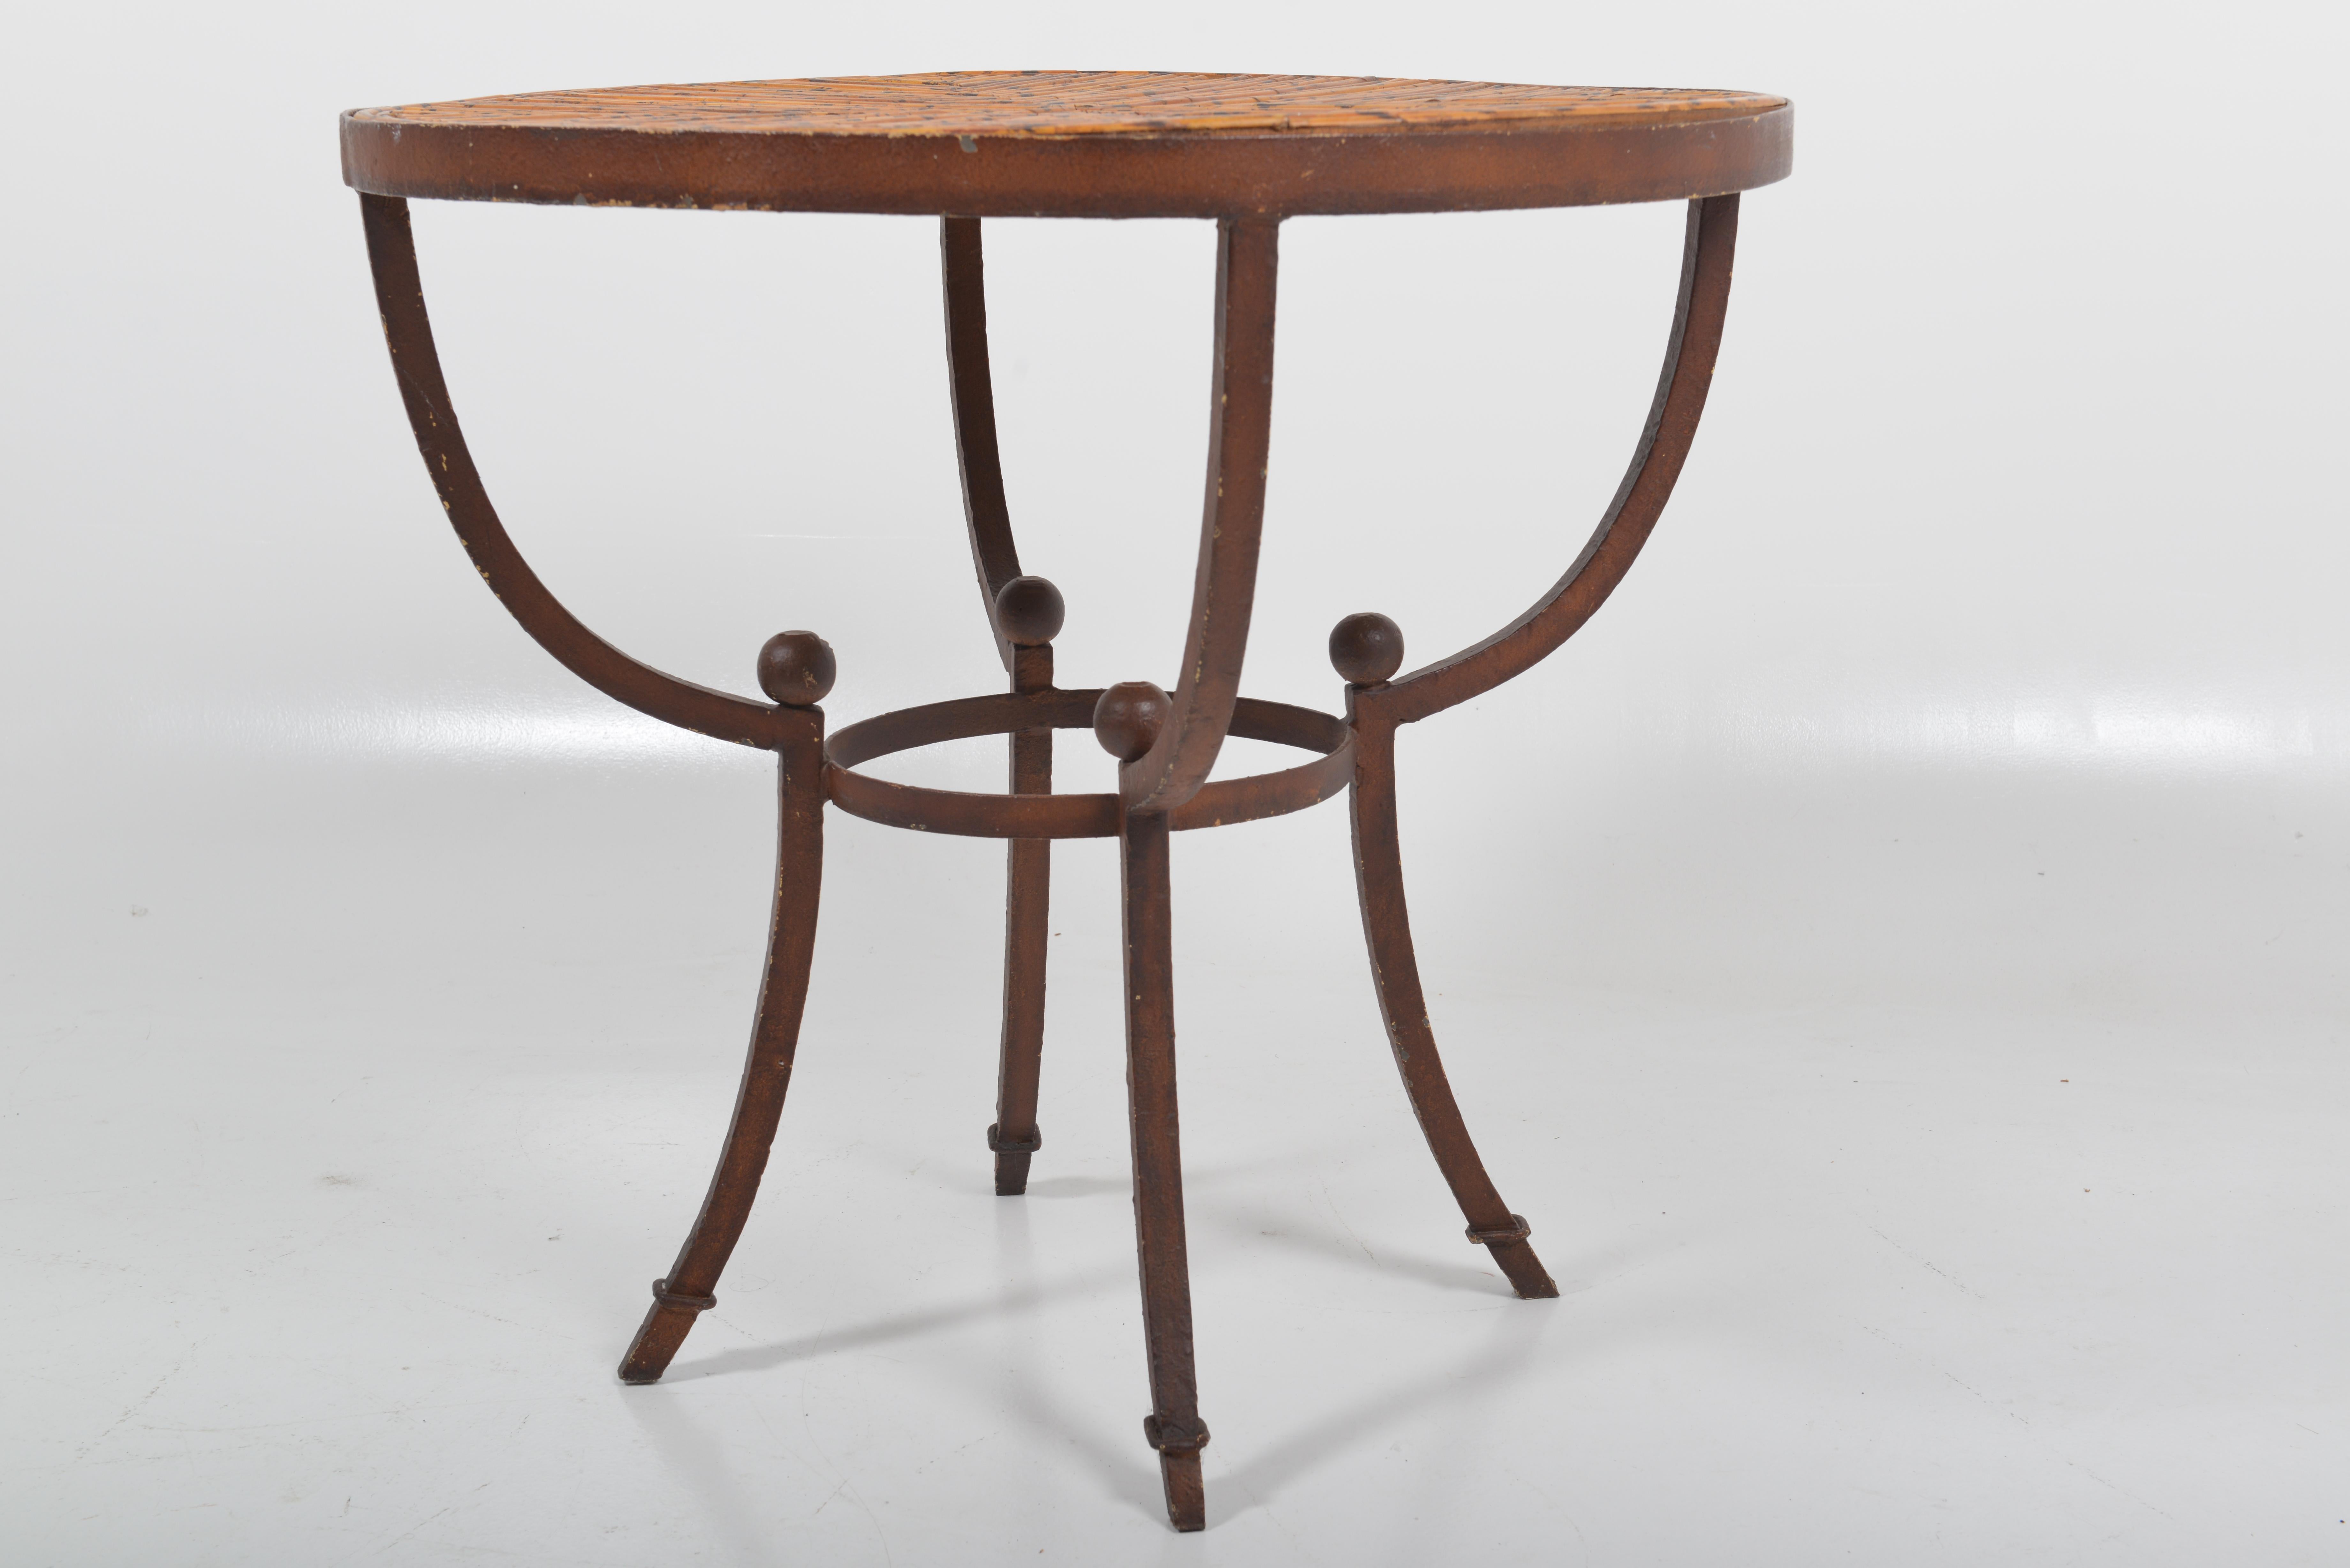 Cast French Art Deco Rustic Side Table, 1920 For Sale